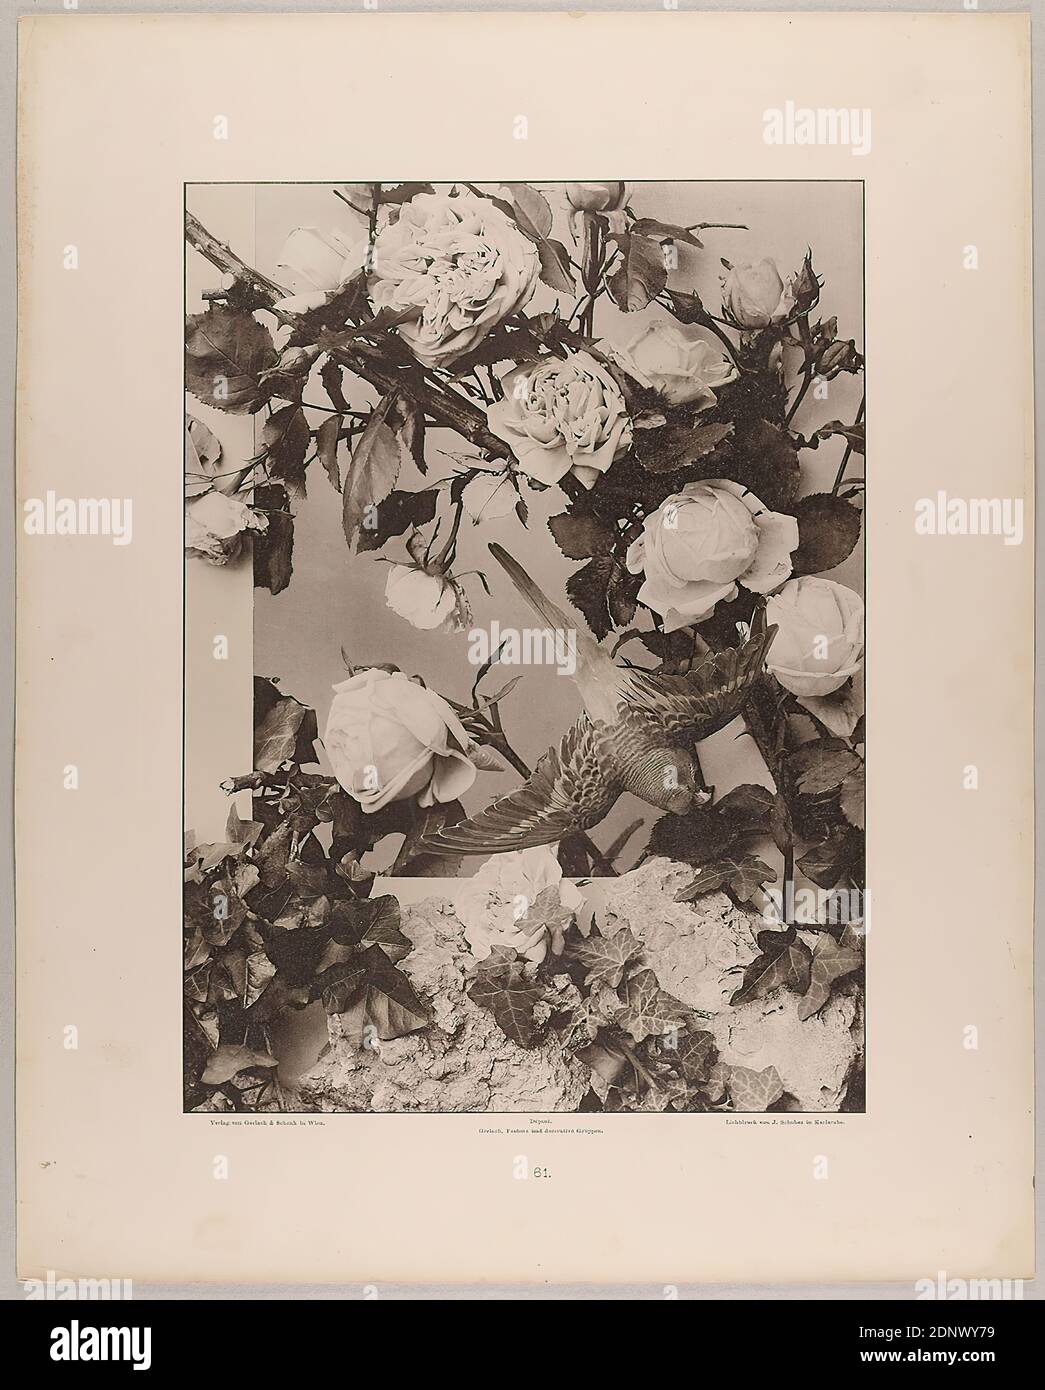 Gerlach & Schenk, Martin Gerlach, J. Schober, 61st group of roses and epheu with parrot, Staatliche Landesbildstelle Hamburg, collection on the history of photography, paper, collotype, sheet size: height: 40.1 cm; width: 32.1 cm, inscribed: recto: Verlag von Gerlach & Schenk in Vienna, Déposé. Gerlach, Festons and decorative groups, collotype by J. Schober in Karlsruhe. Numbering, Landesbildstelle, handwritten inv. no, photography, plants and herbs, plant ornaments, parrot, flowers, ivy, rose, rock types, minerals, metals, soil types, birds Stock Photo